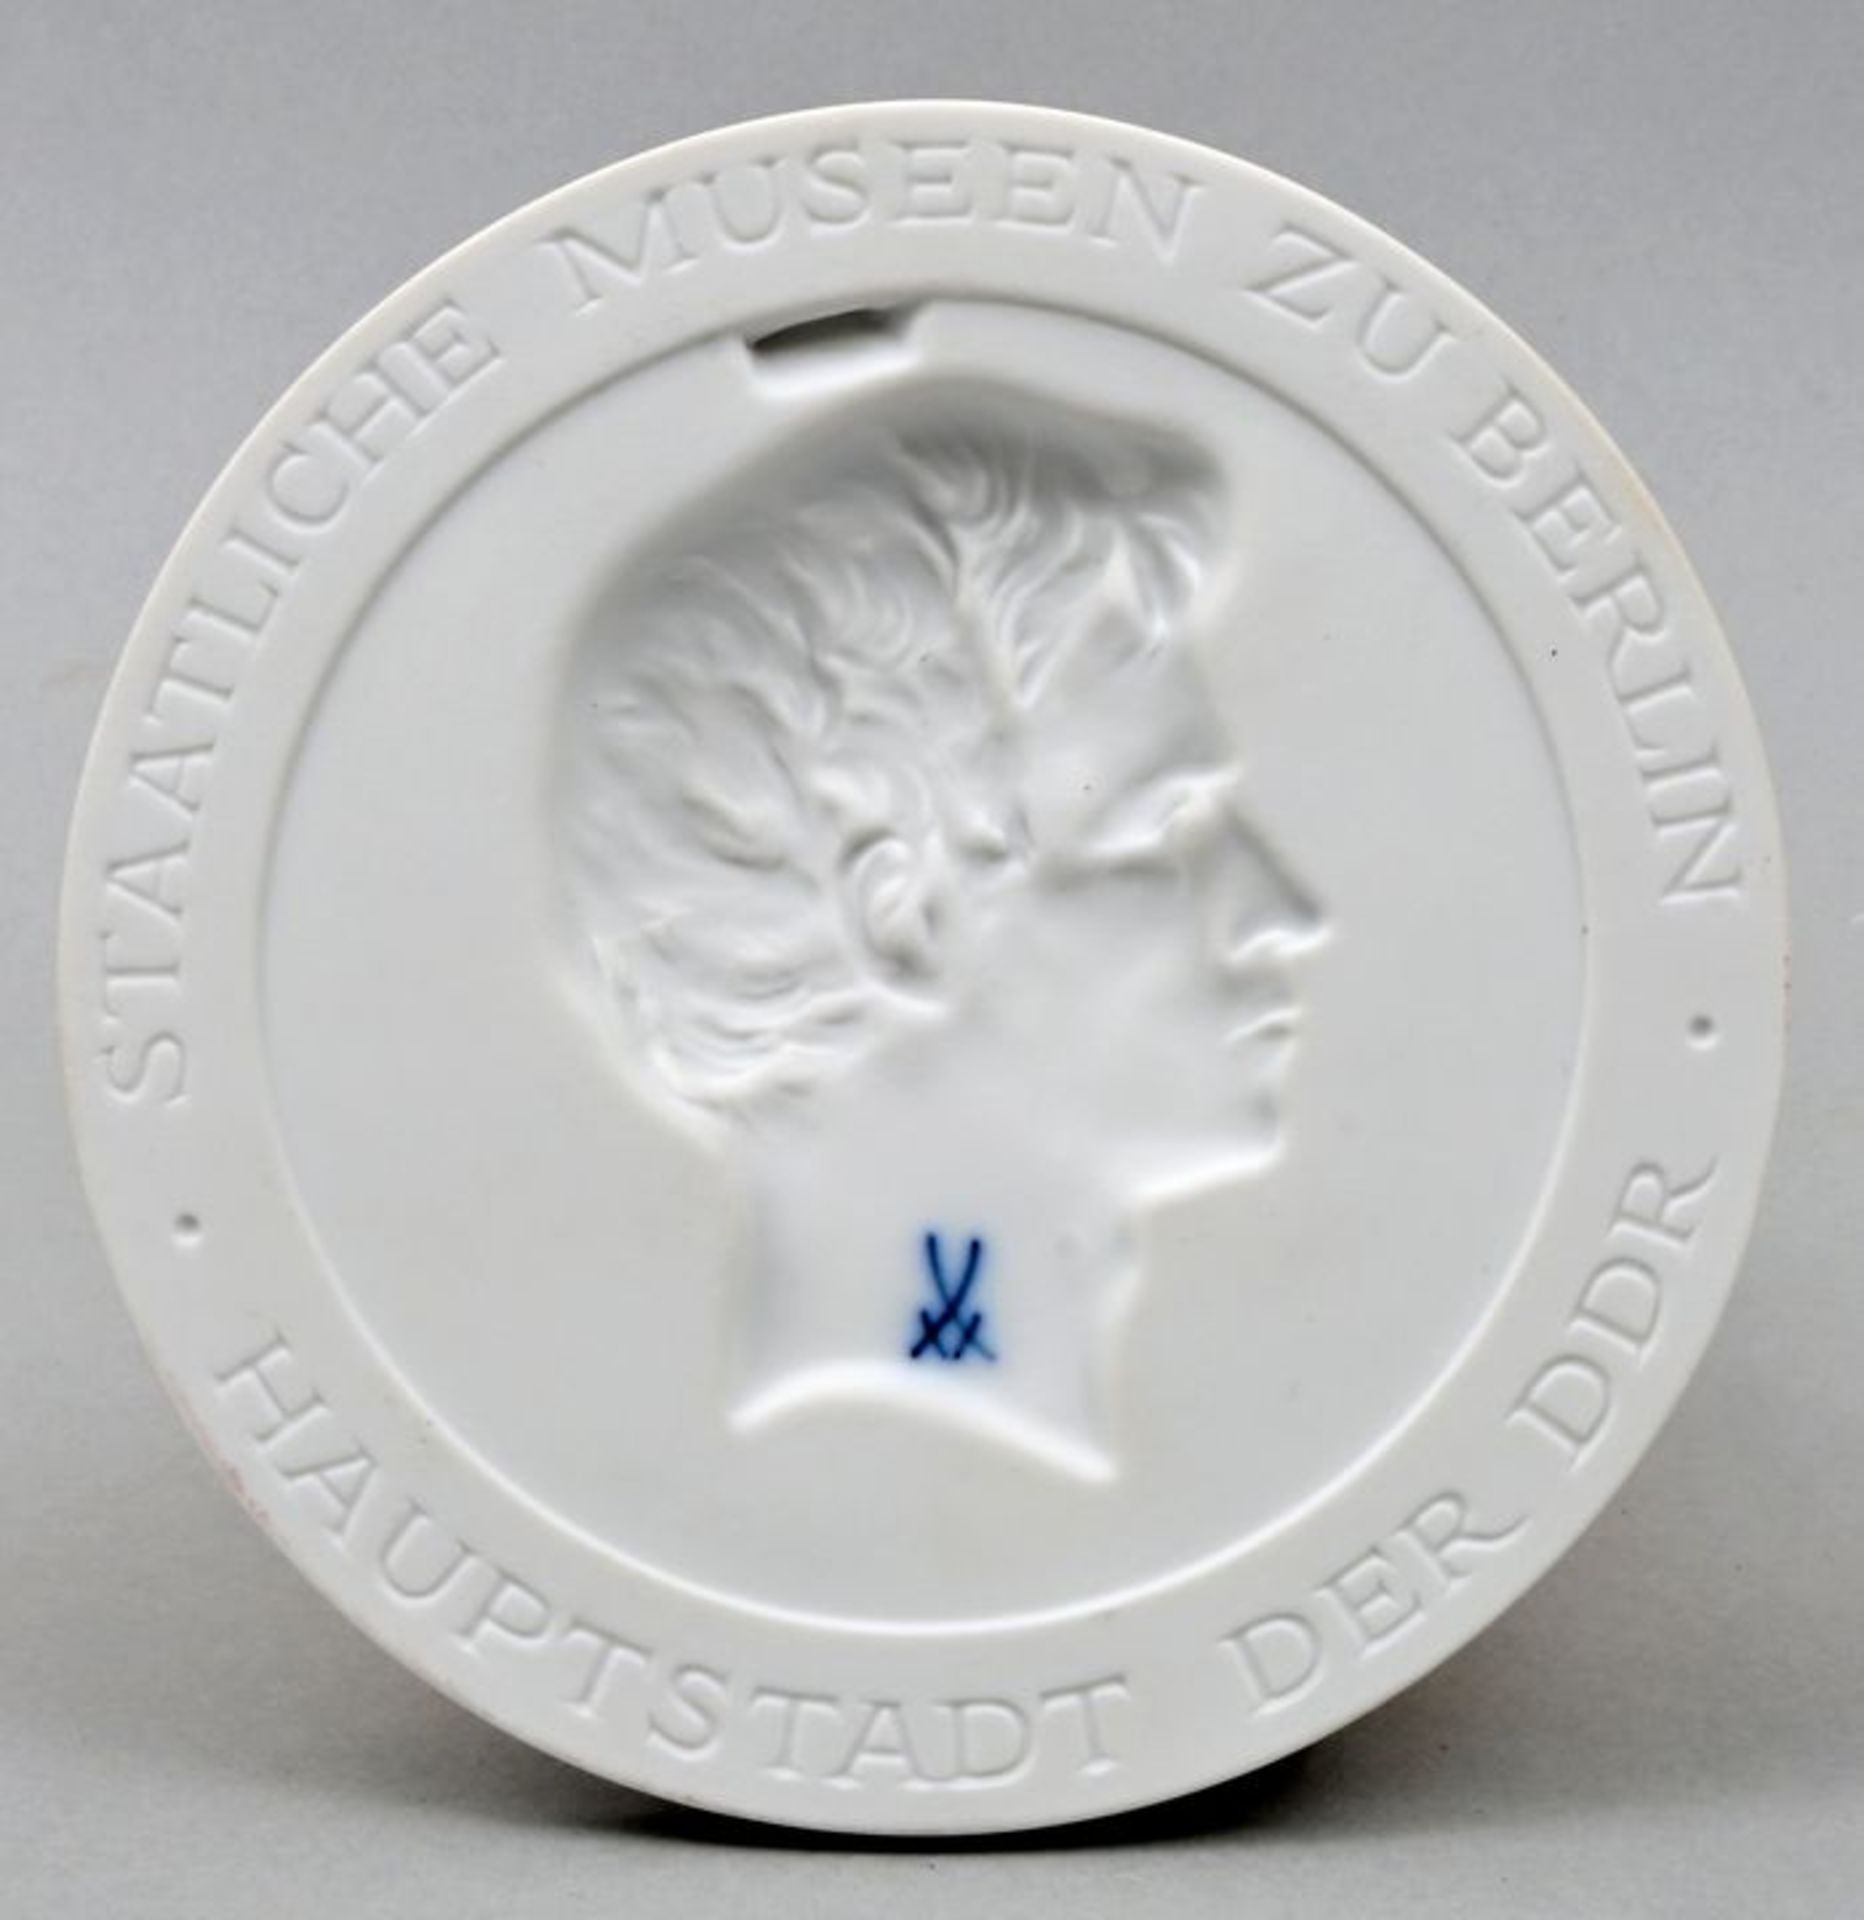 Plakette Meissen Lilienthal / Plaque with relief head - Image 3 of 3